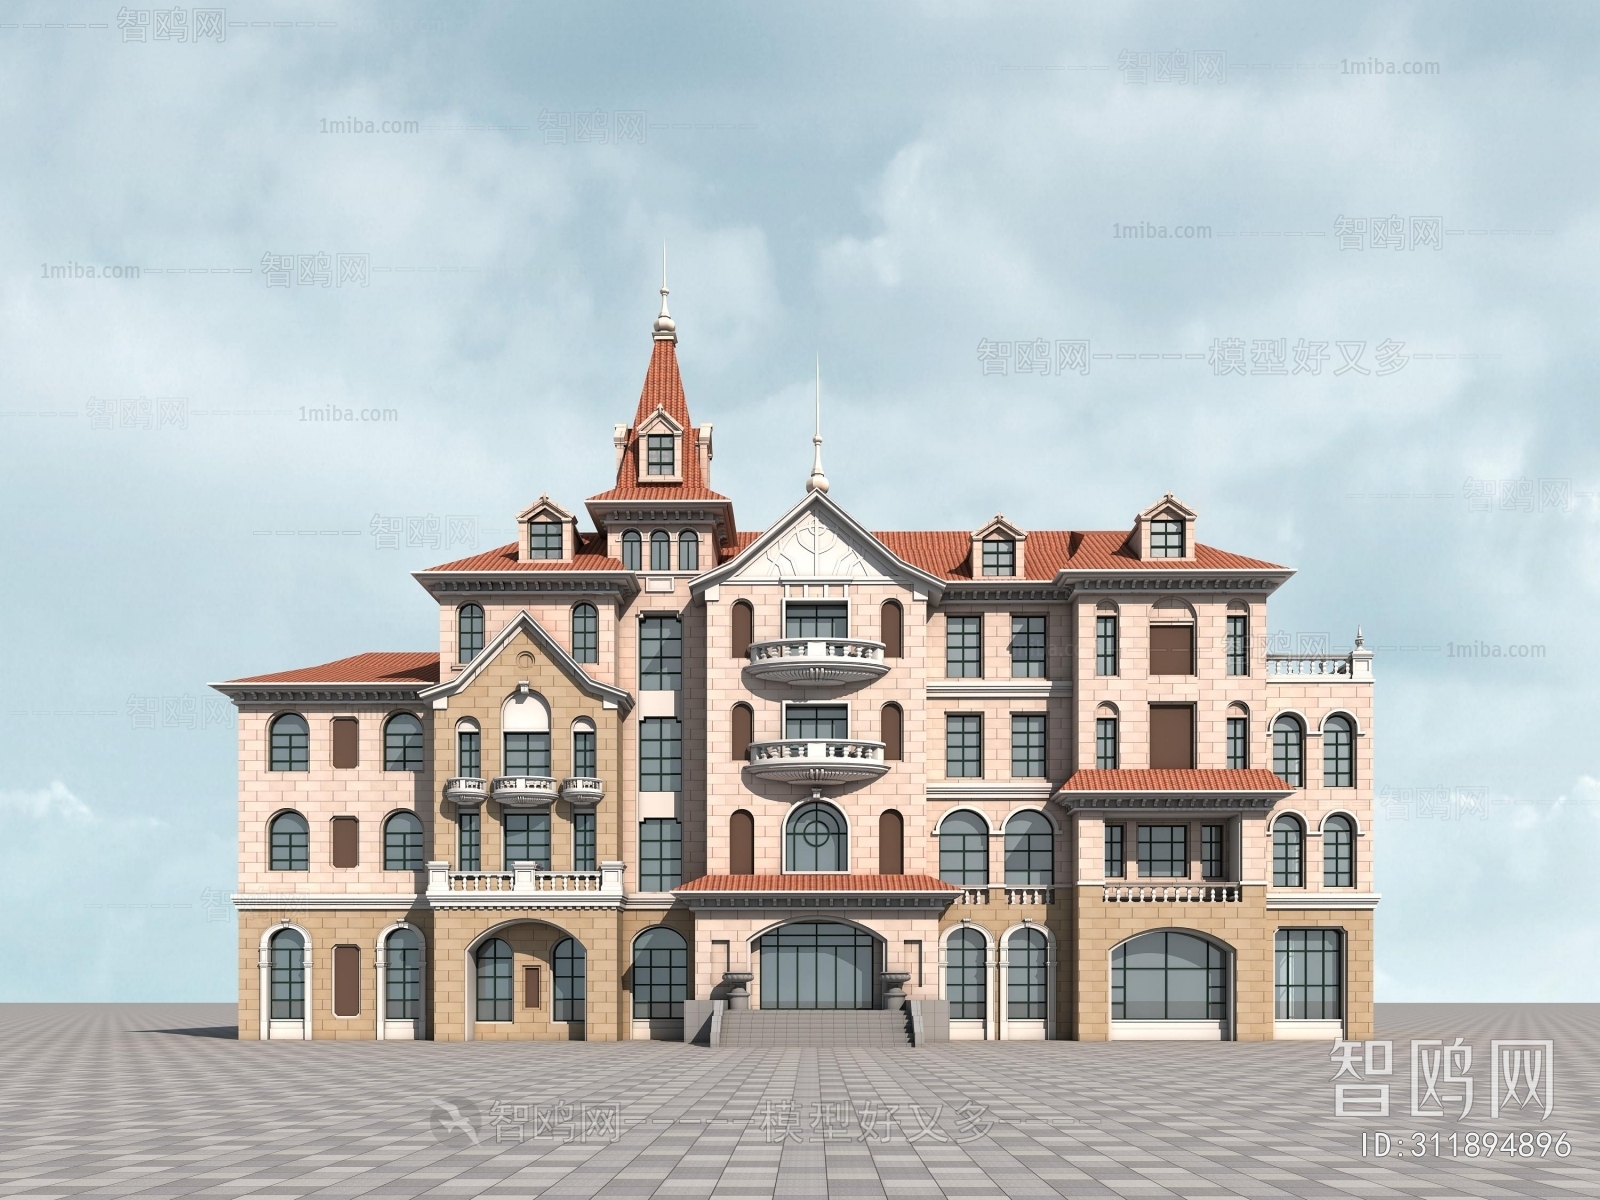 Simple European Style Appearance Of Commercial Building